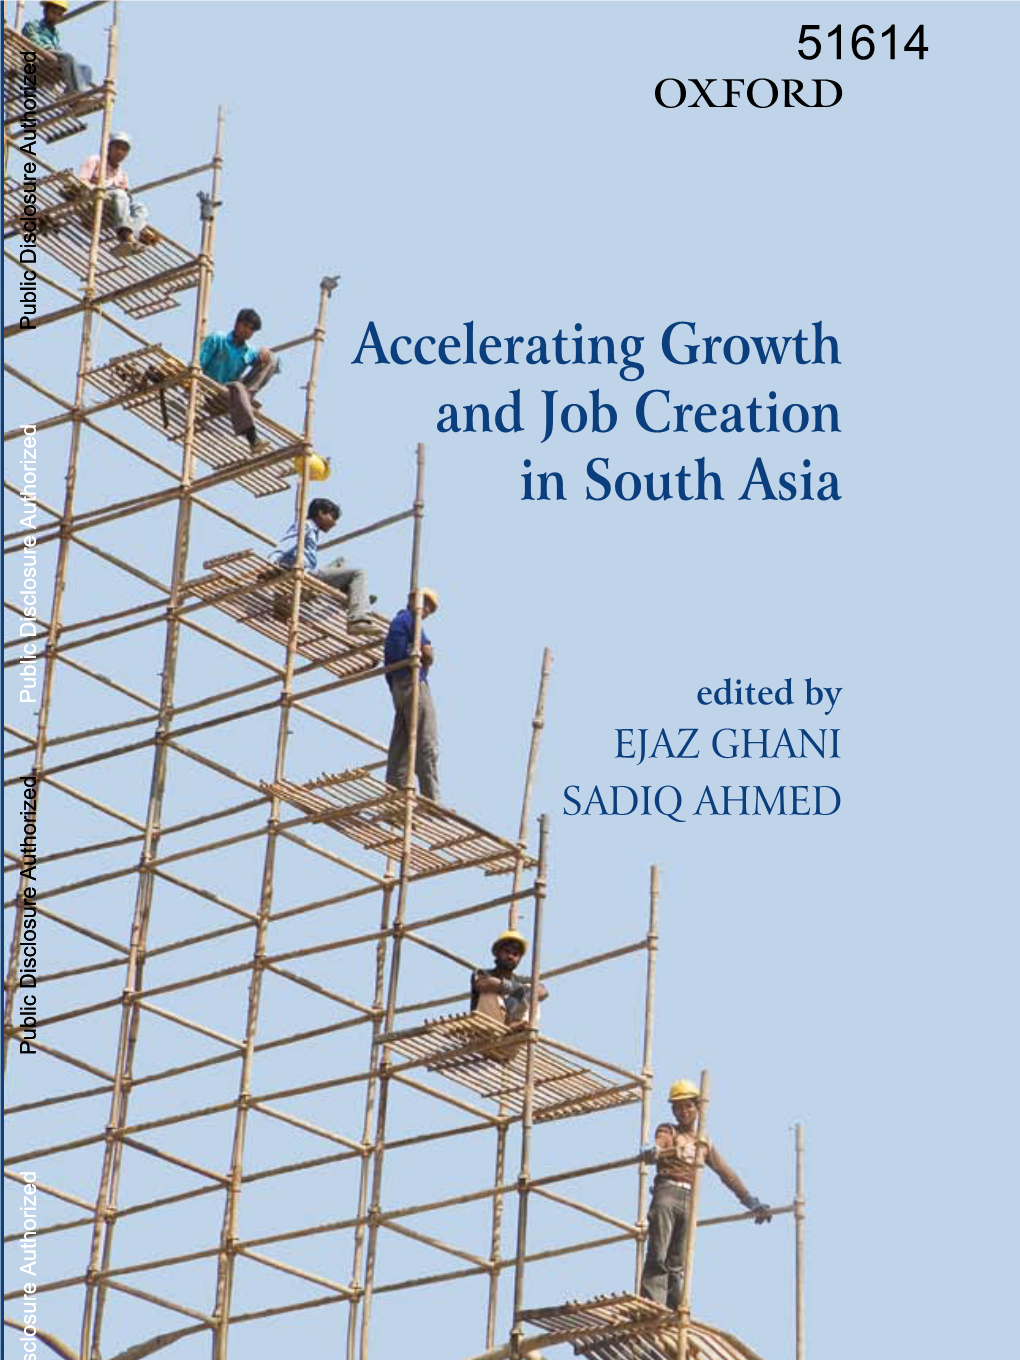 Edited by Accelerating Growth and Job